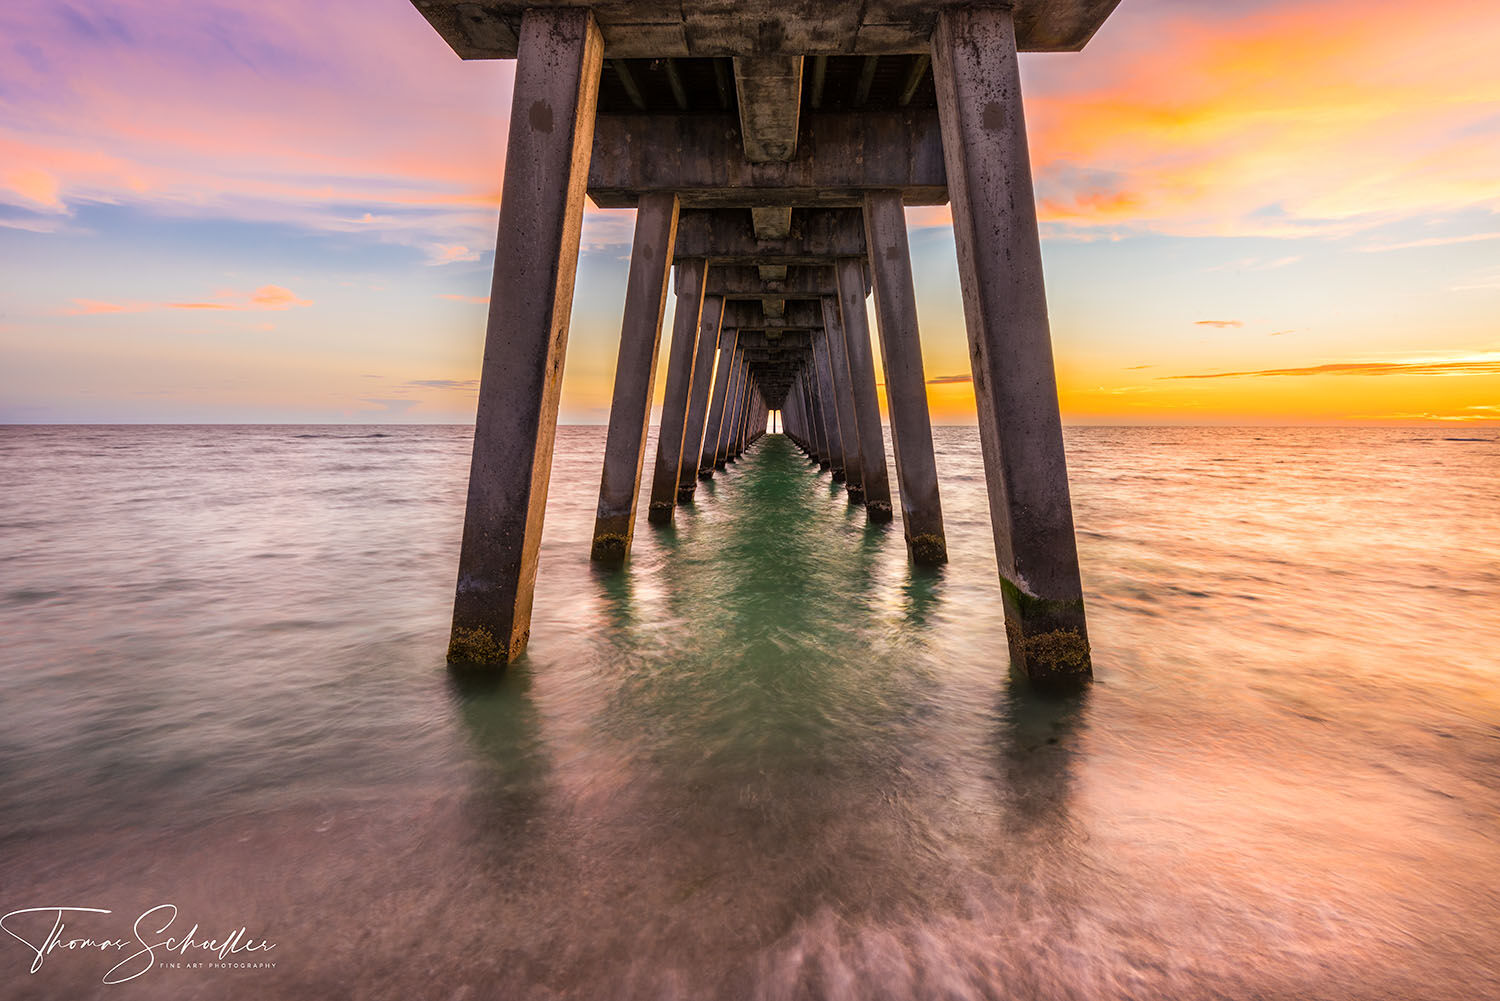 Inspiring sunset from Venice Beach Pier | Gulf Coast of western Florida | Limited Edition seascape fine art prints for sale